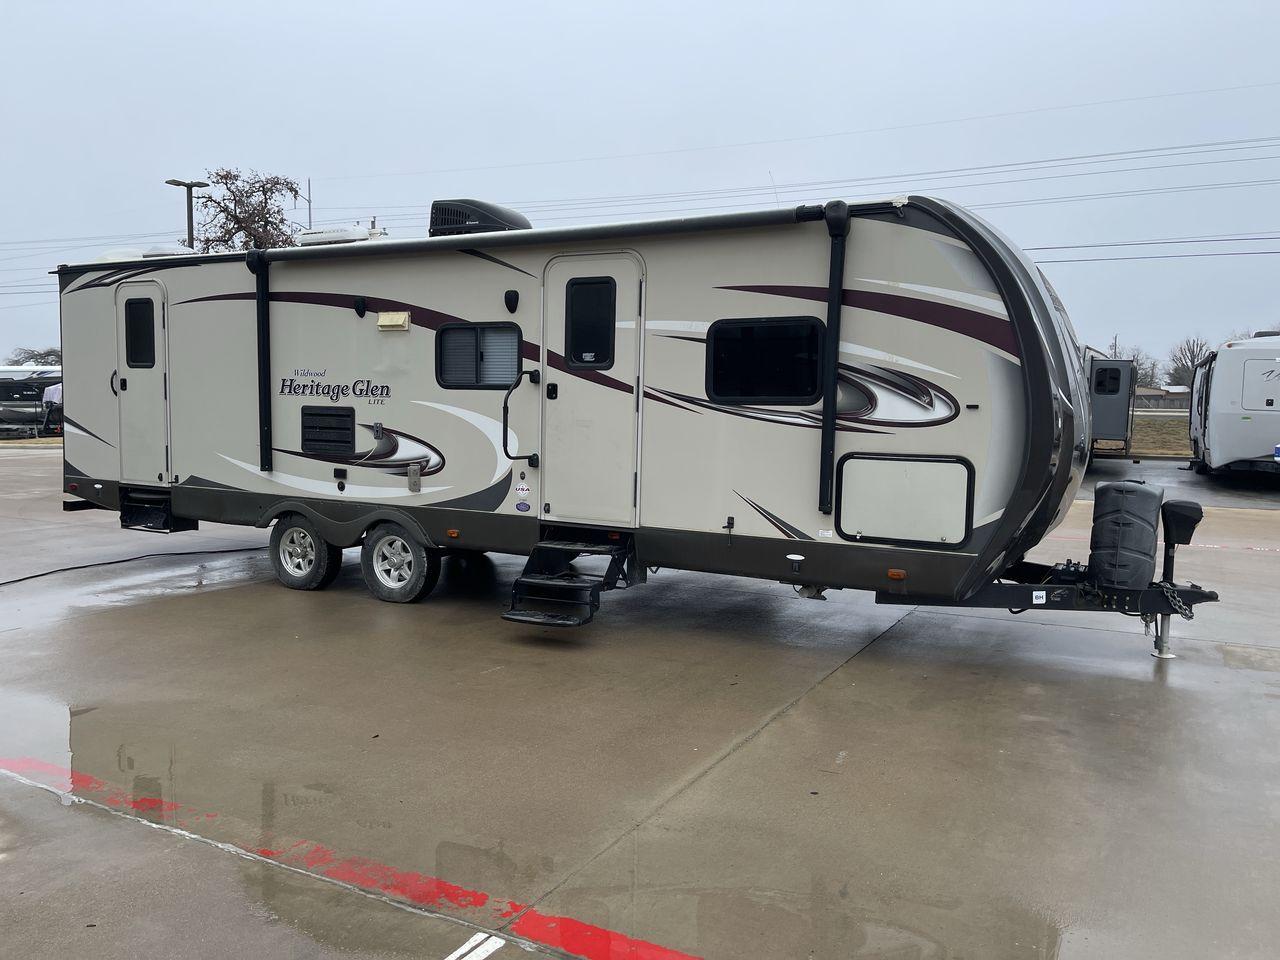 2015 TAN FOREST RIVER HERITAGE GLEN 272BH (4X4TWBC28FU) , Length: 32.25 ft. | Dry Weight: 6,285 lbs. | Gross Weight: 9,450 lbs. | Slides: 1 transmission, located at 4319 N Main St, Cleburne, TX, 76033, (817) 678-5133, 32.385960, -97.391212 - Photo #23